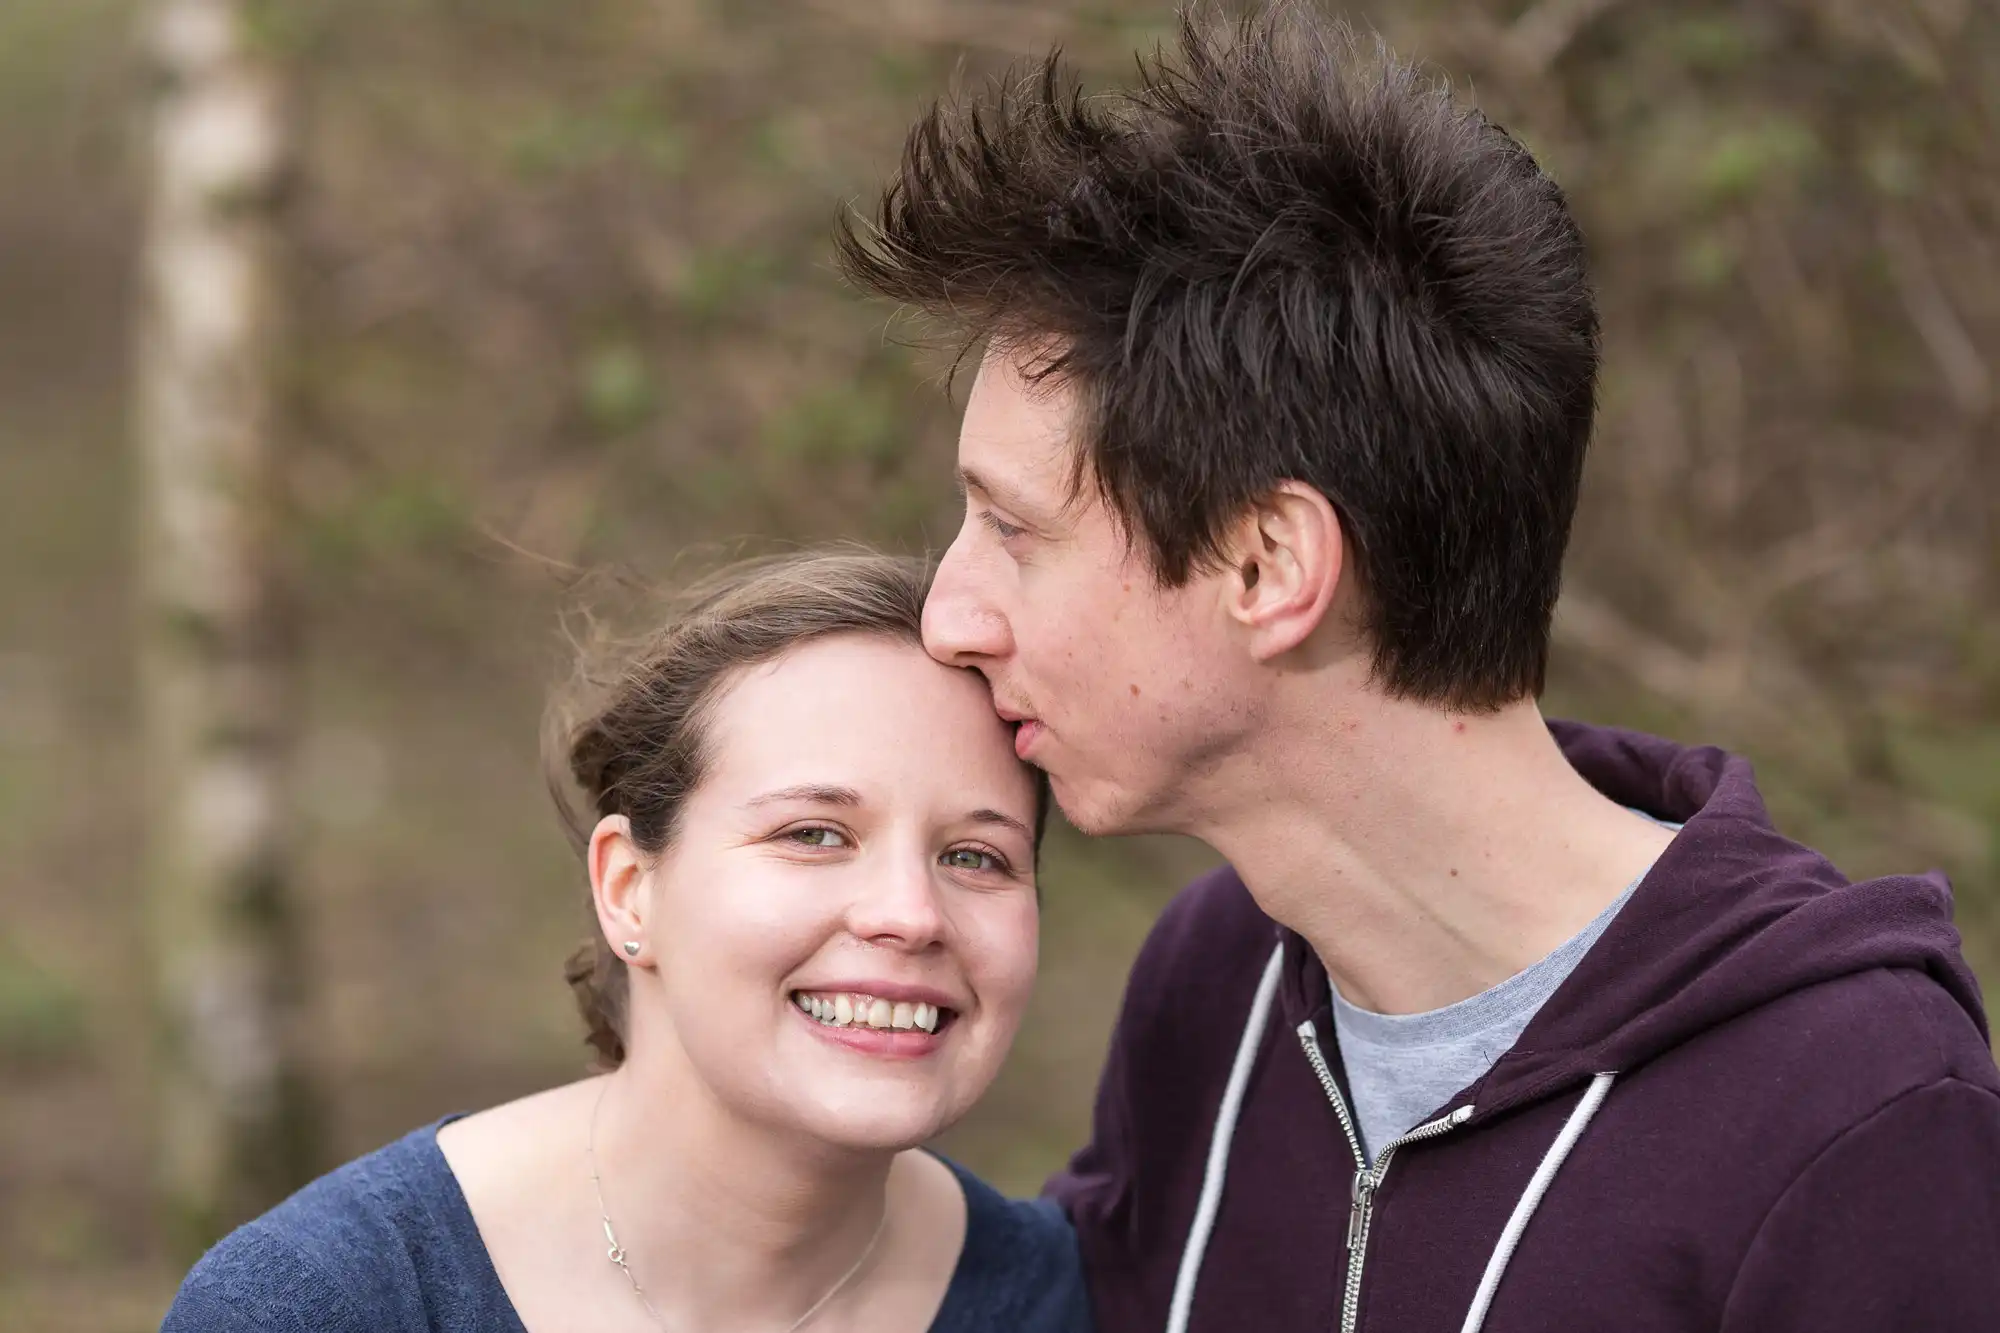 A man kissing a smiling woman on the cheek outdoors, both wearing casual clothing with a blurred natural background.